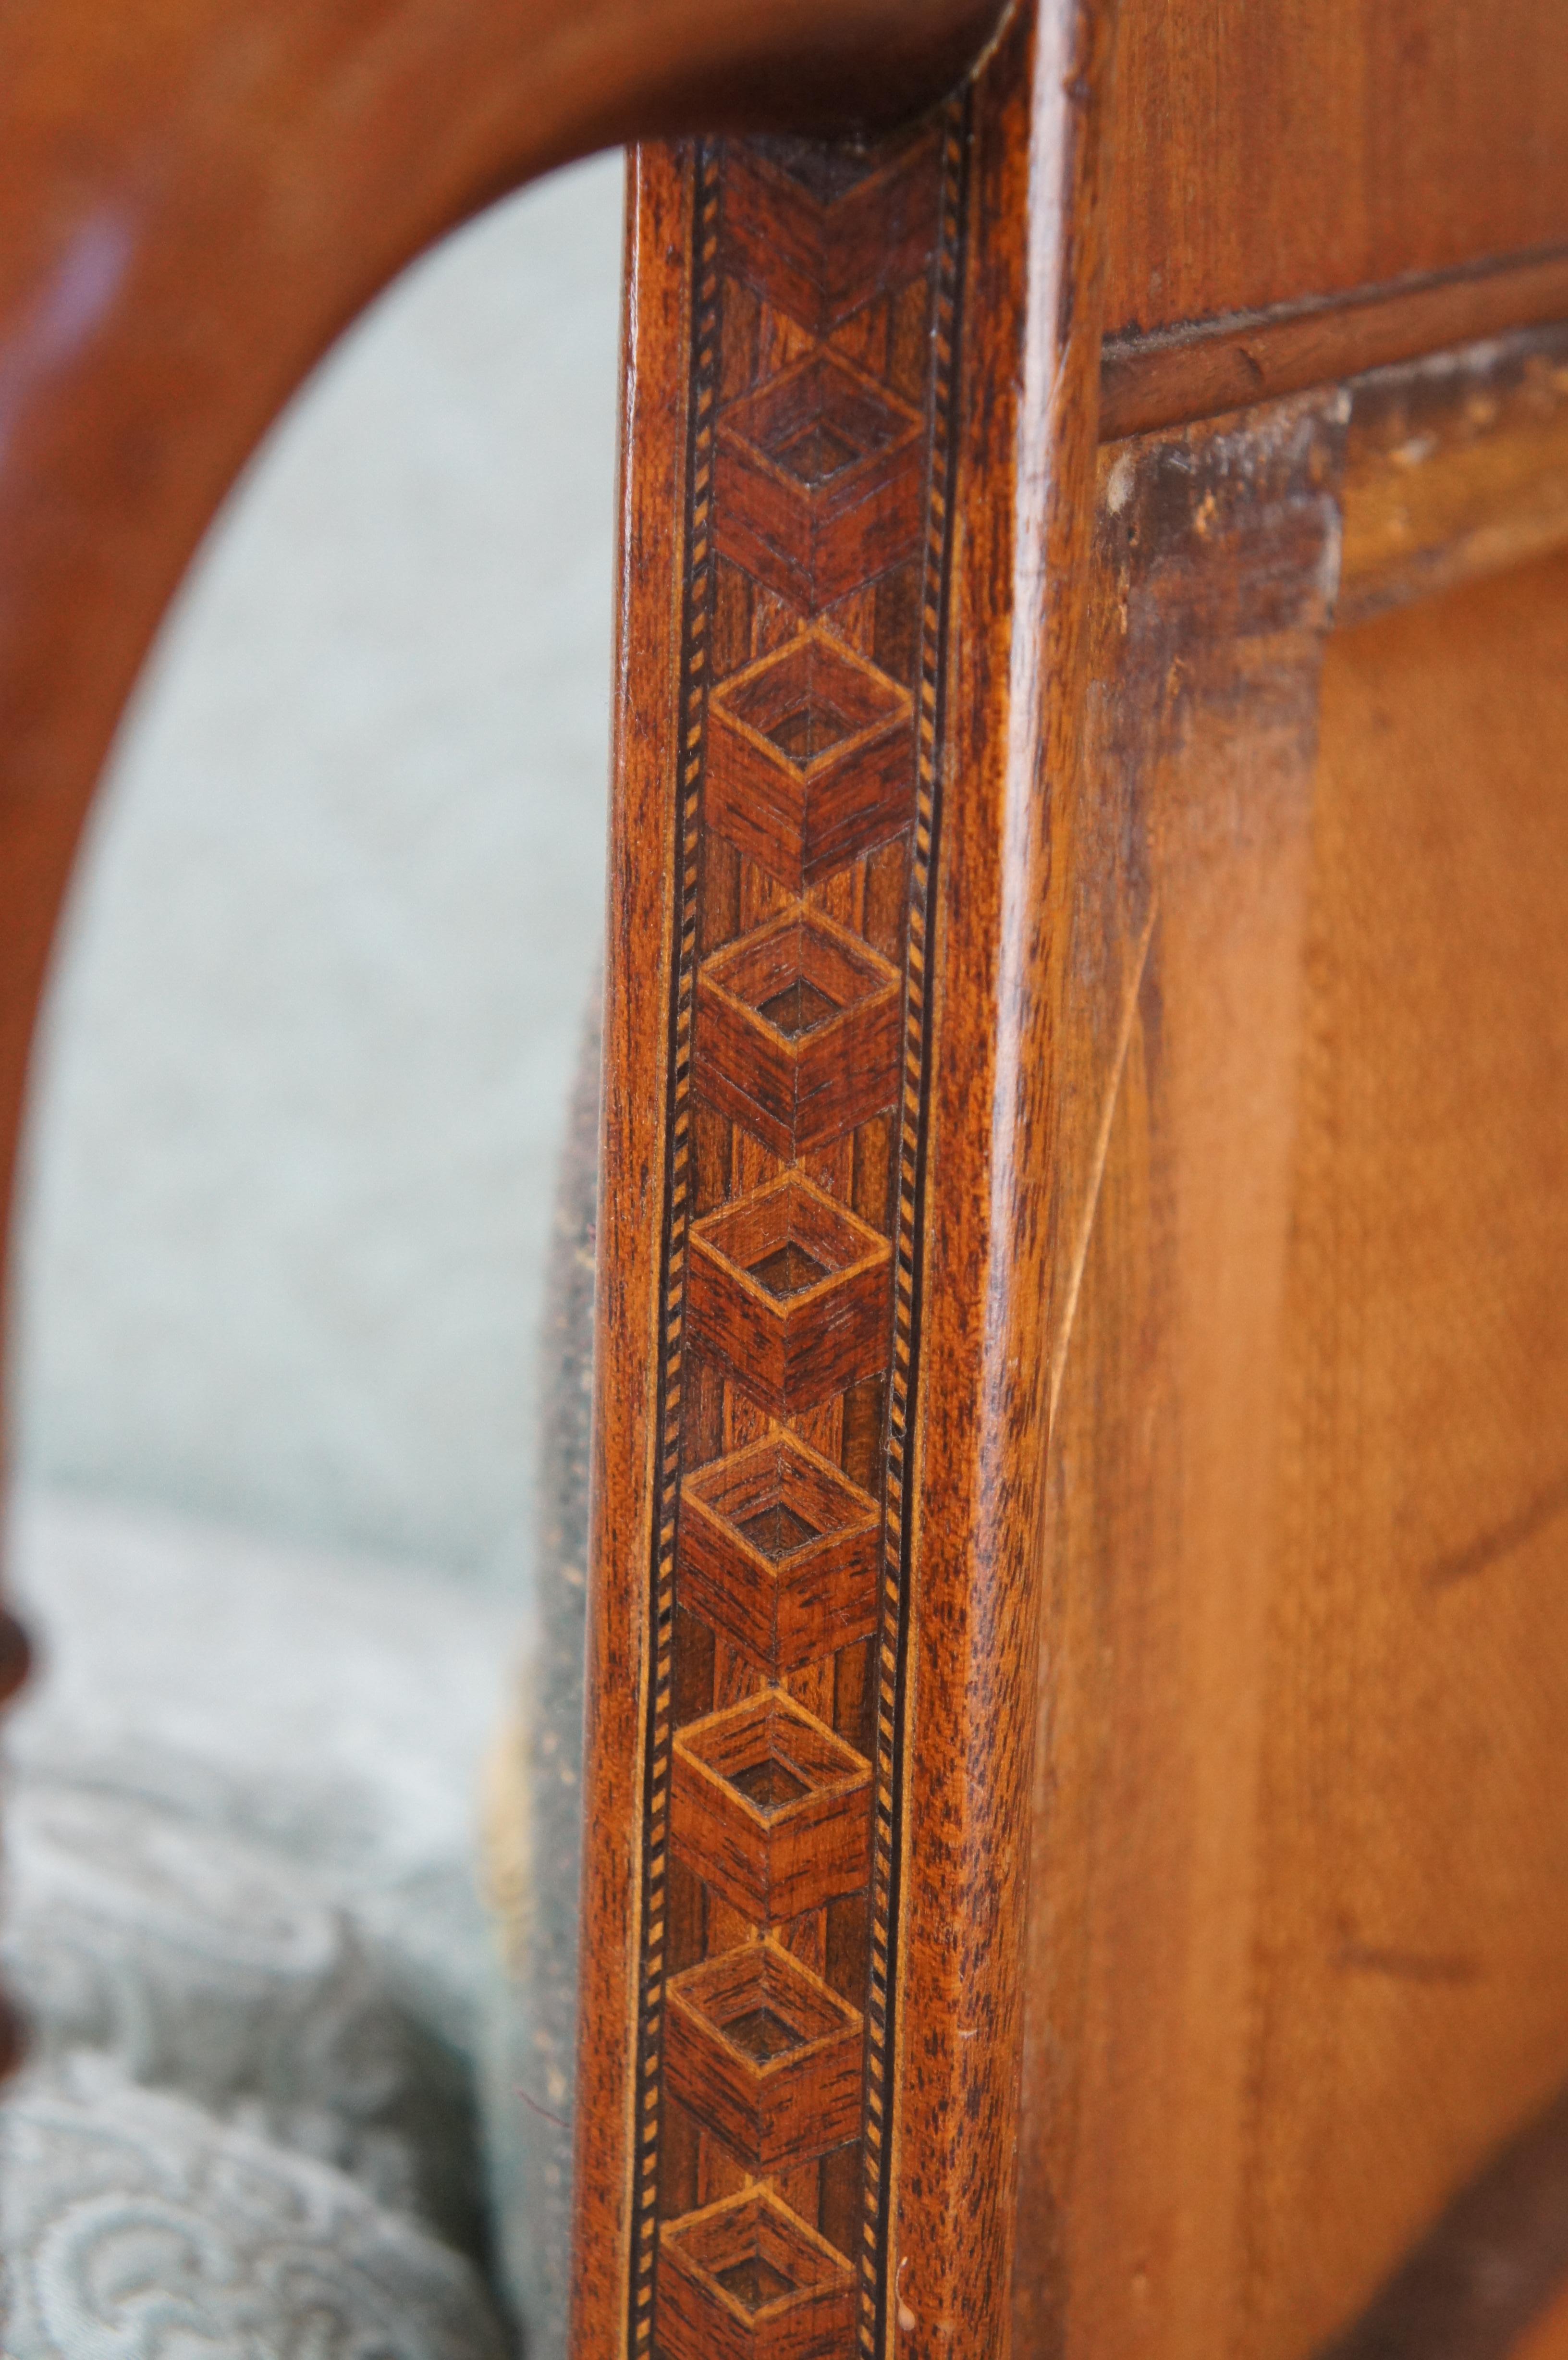 Early 19th Century Rare Antique American Federal Mahogany Inlaid Sofa Settee Boston Massachusetts For Sale